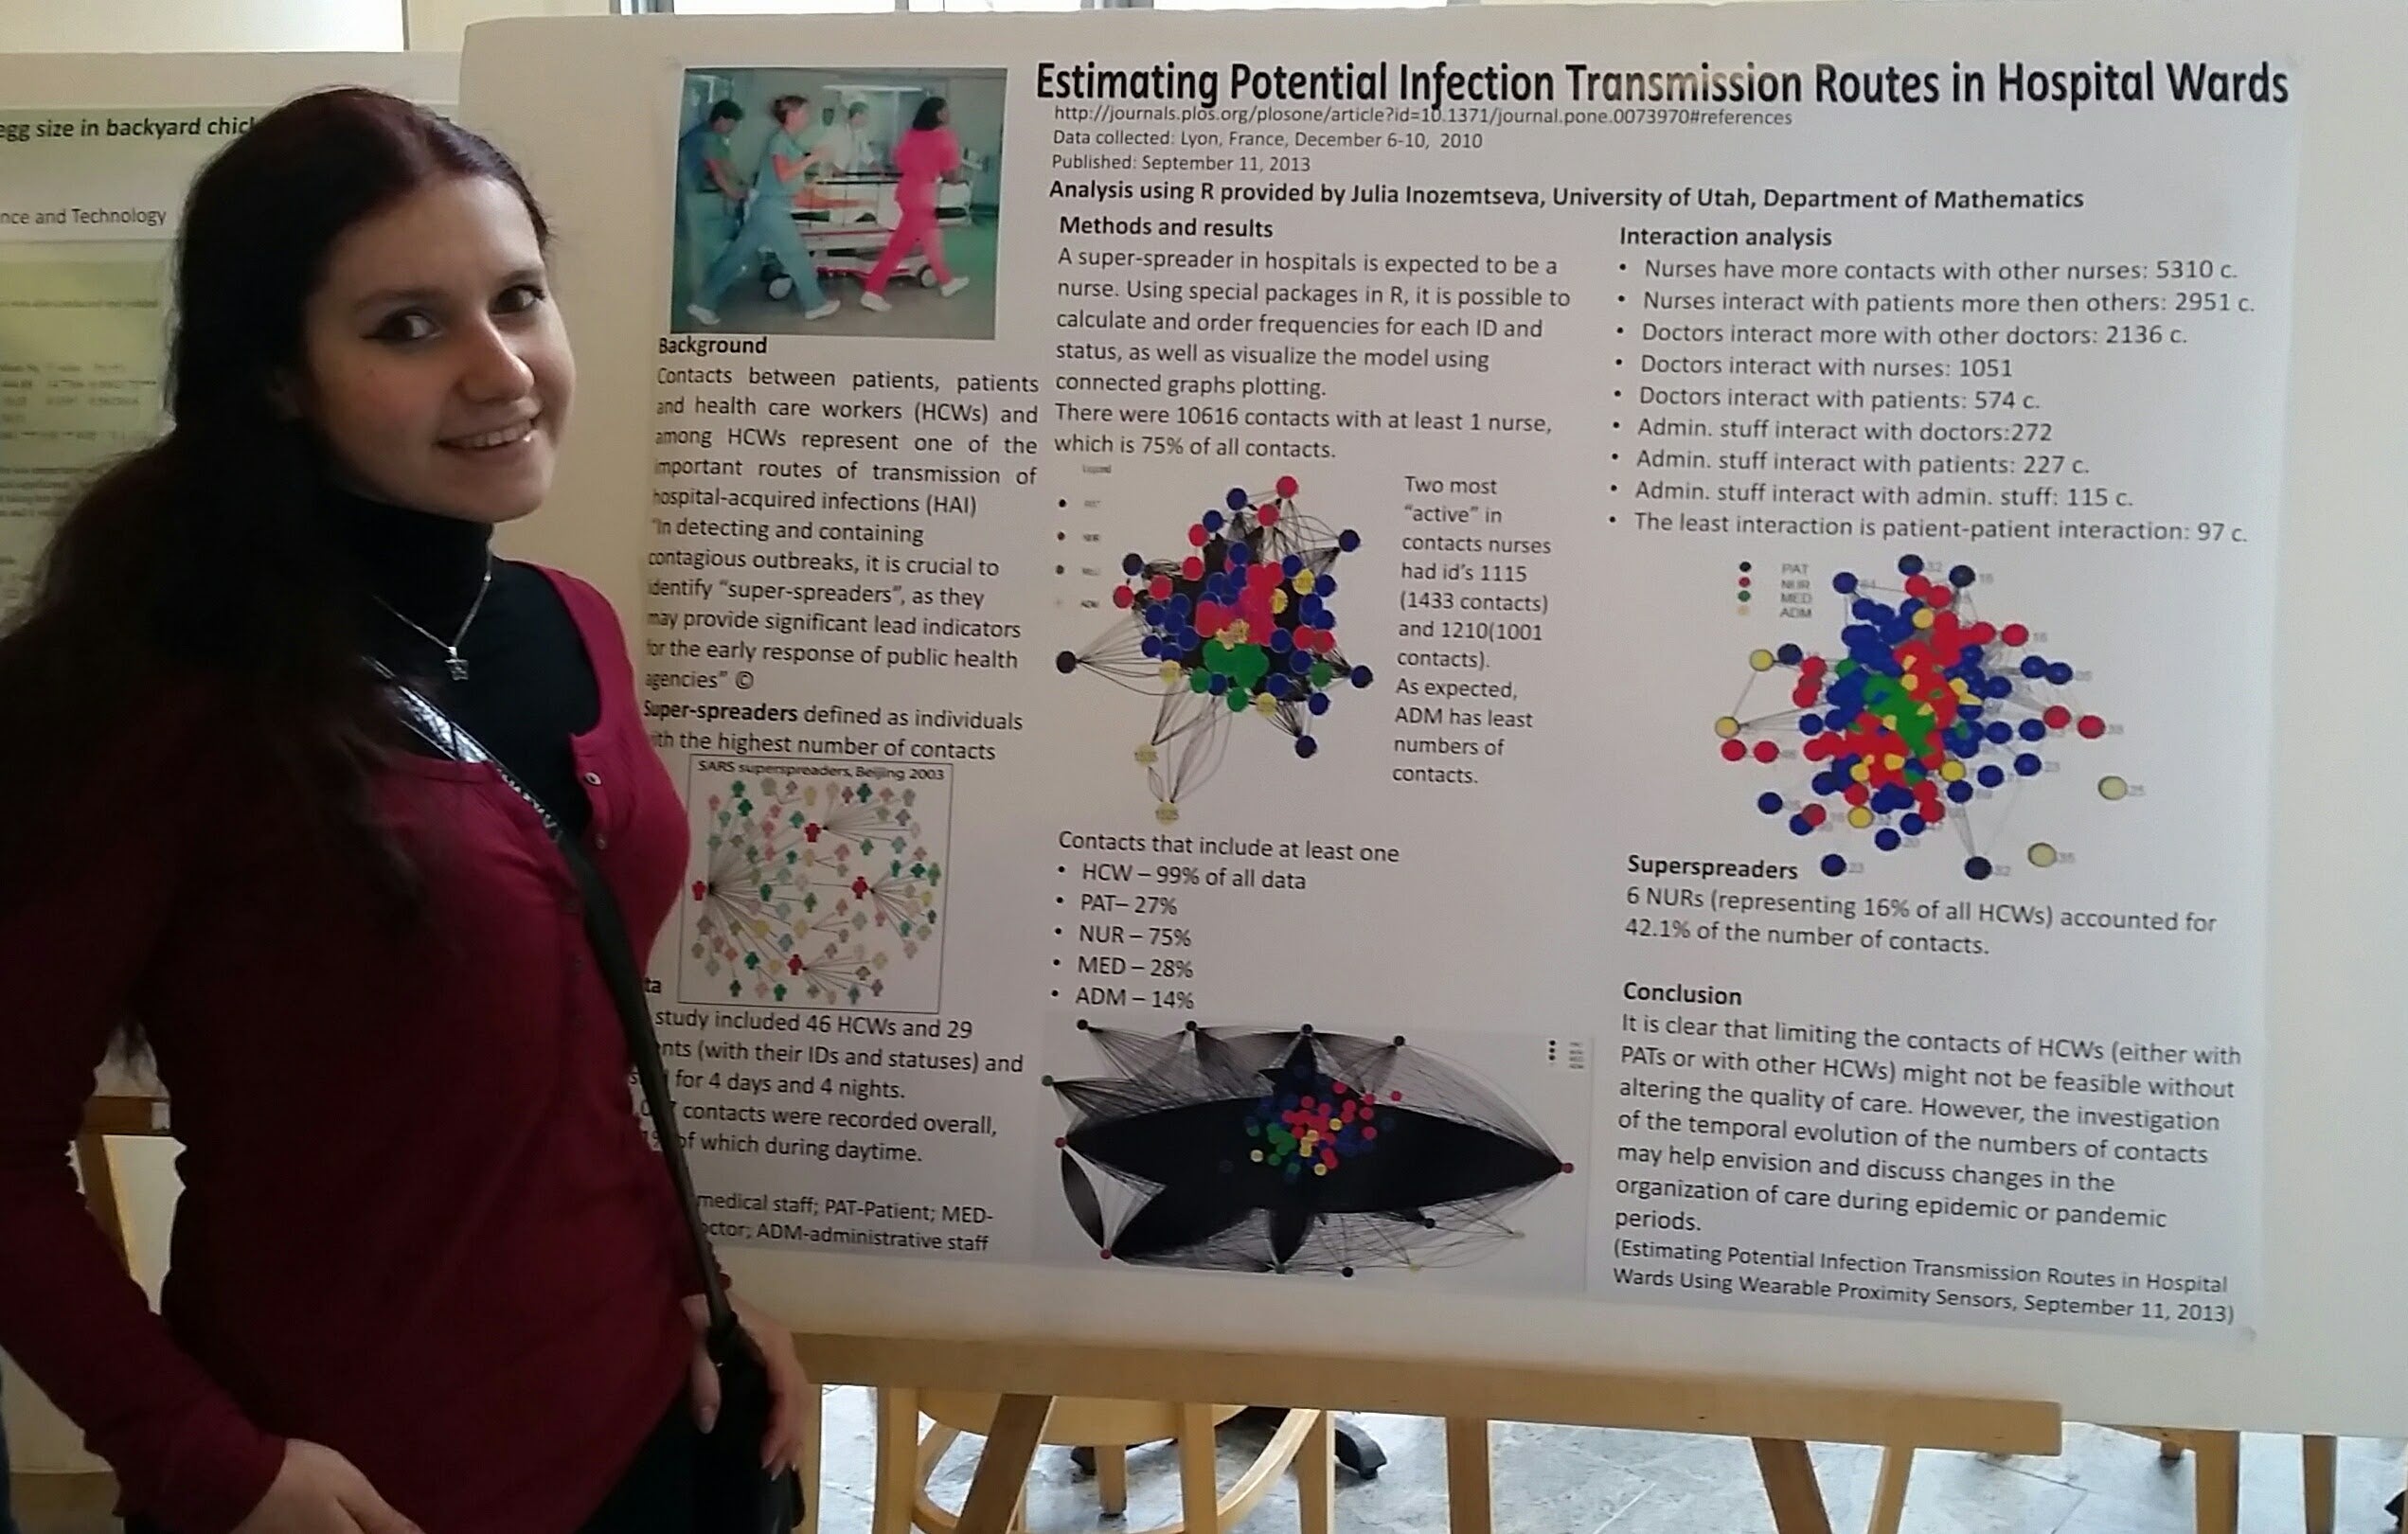 Poster on modeling potential infection transmission in hospital using system of differential equations and data